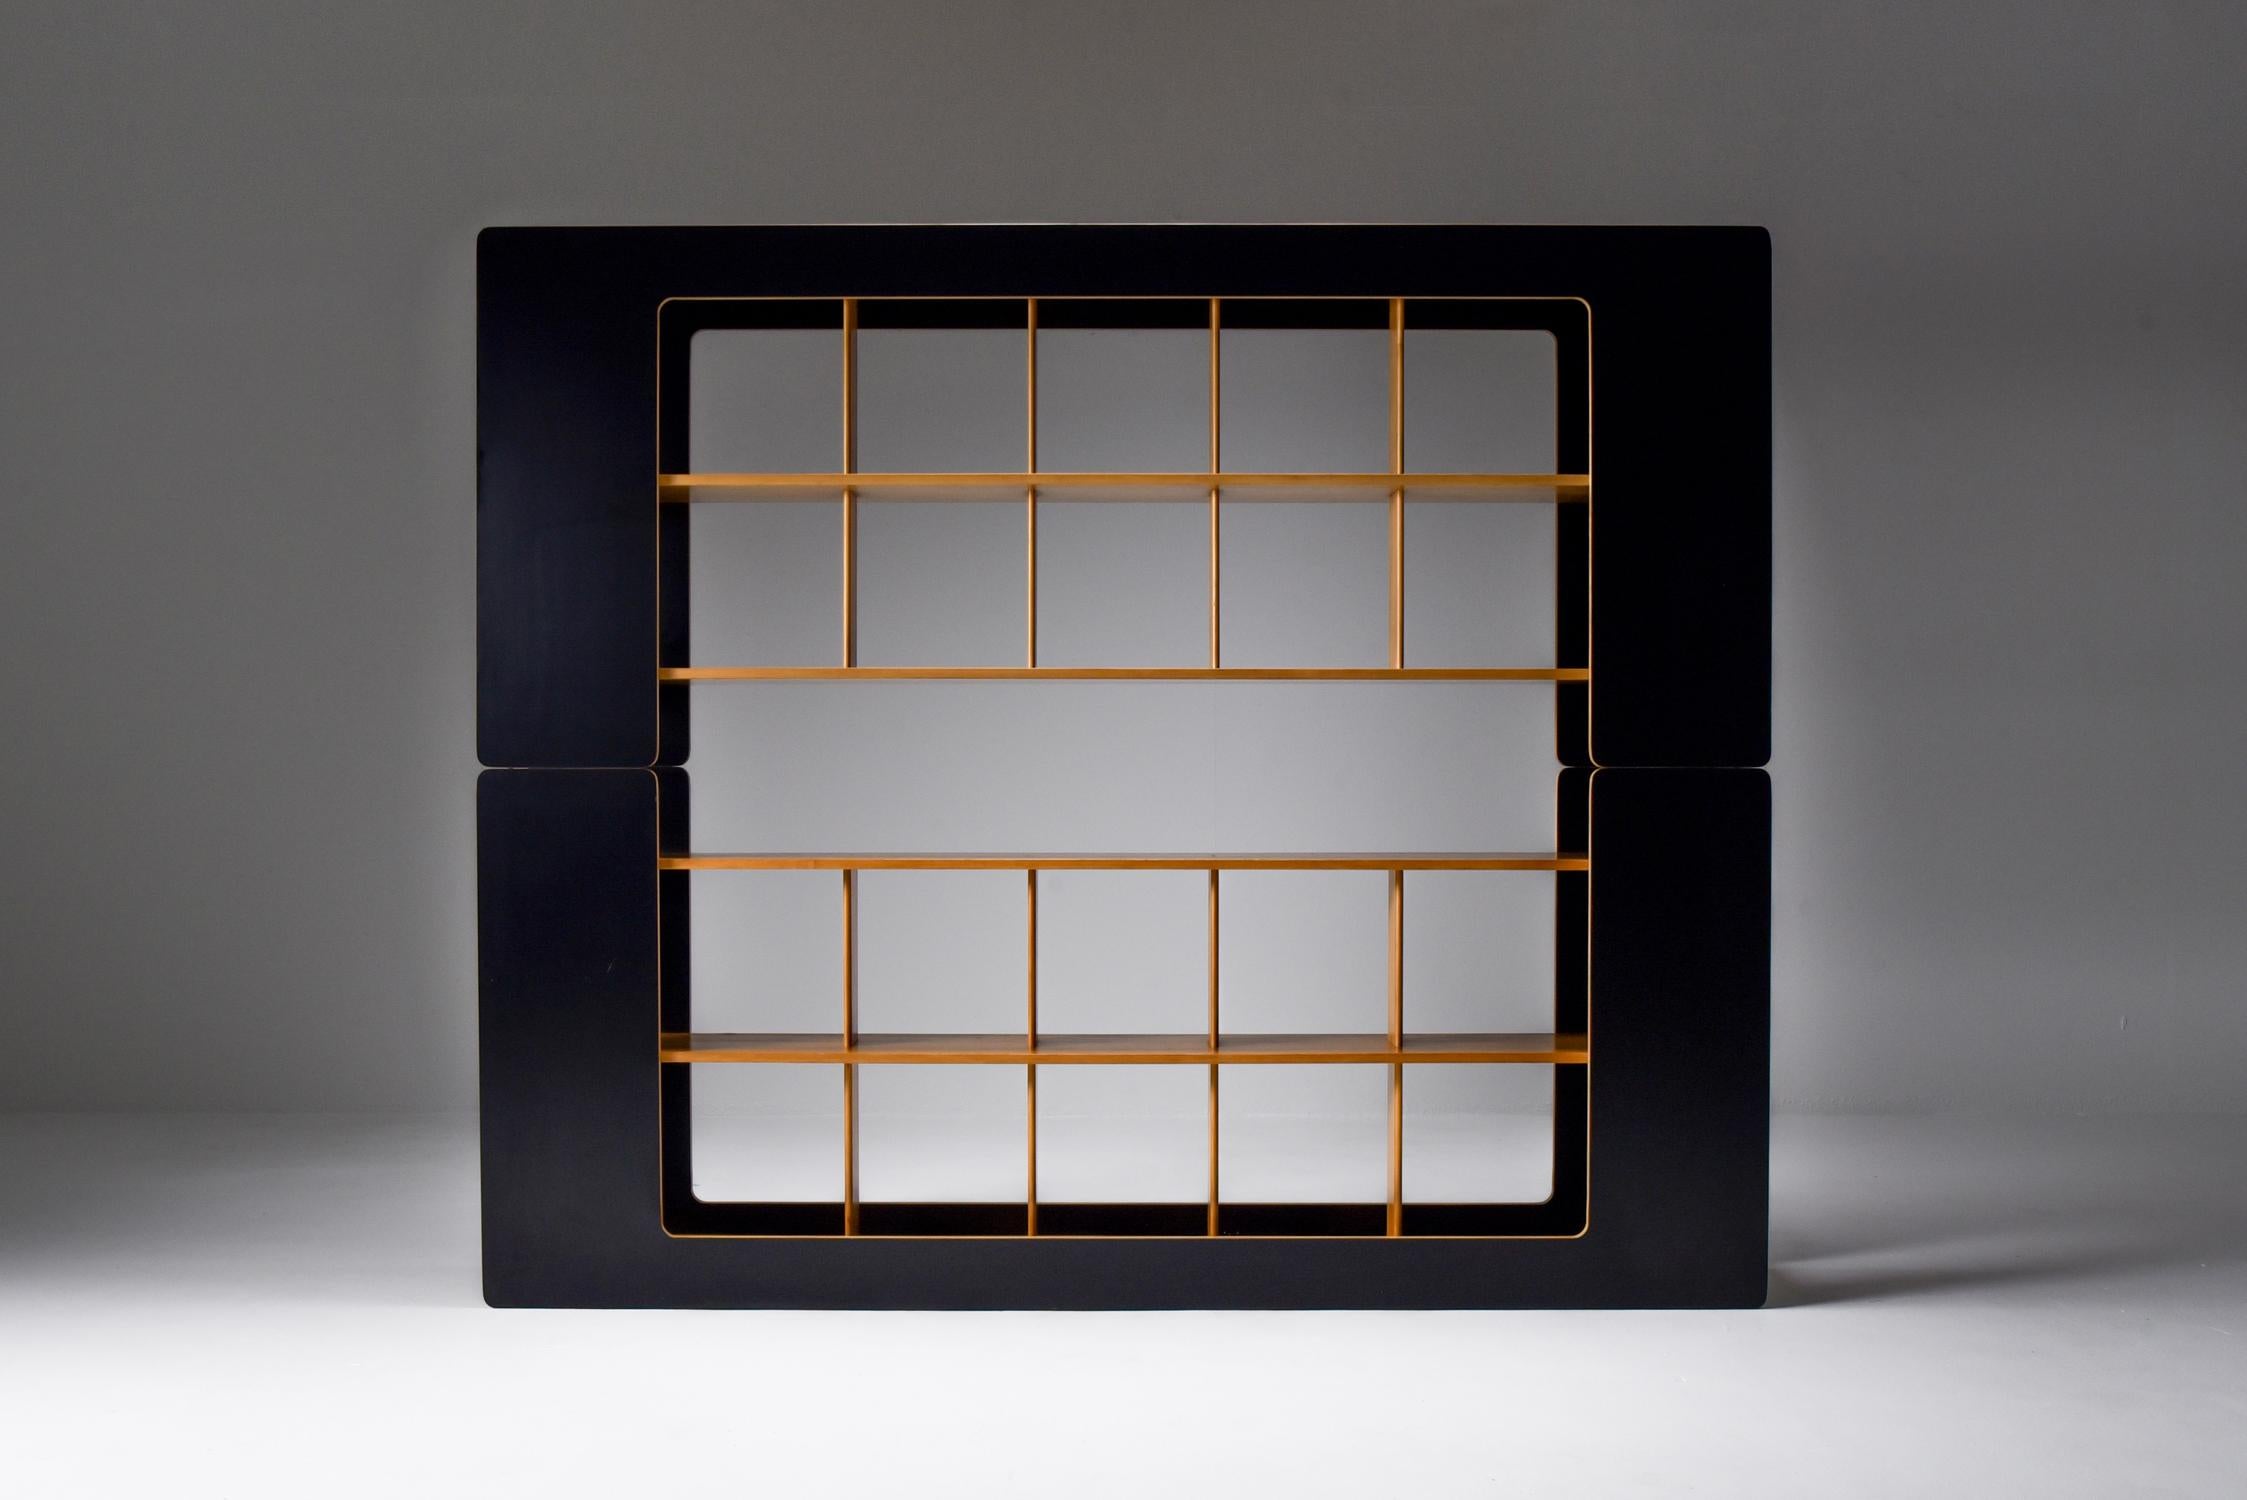 Roberto Pamio and Renato Toso, shelve unit, room divider, Stilwood, Italy, 1972

Unusual post-modern Italian free standing shelve unit in black Formica and blonde wood. A great and rare piece by the avant-garde designers Roberto Pamio and Renato